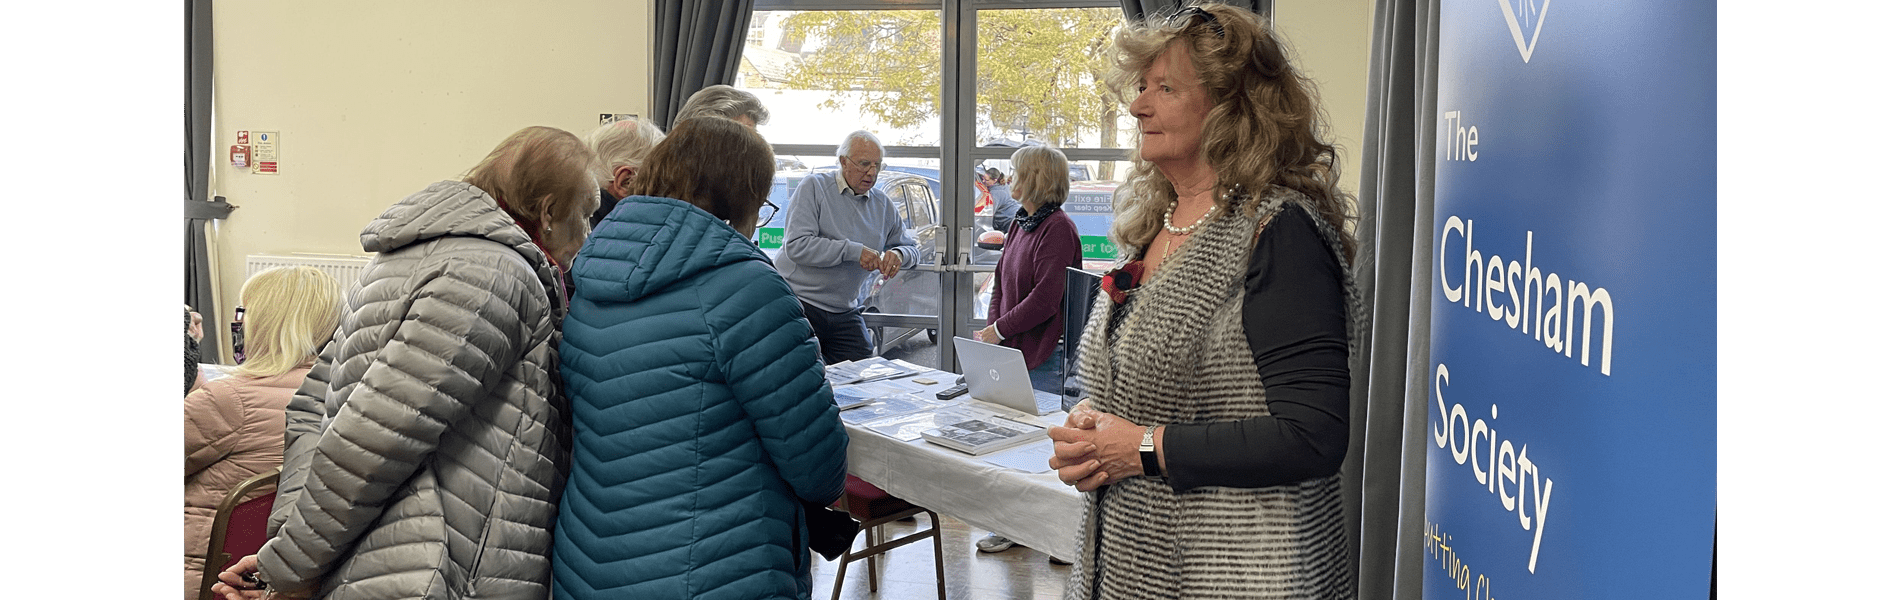 Chesham Society members talking to the public at an exhibition